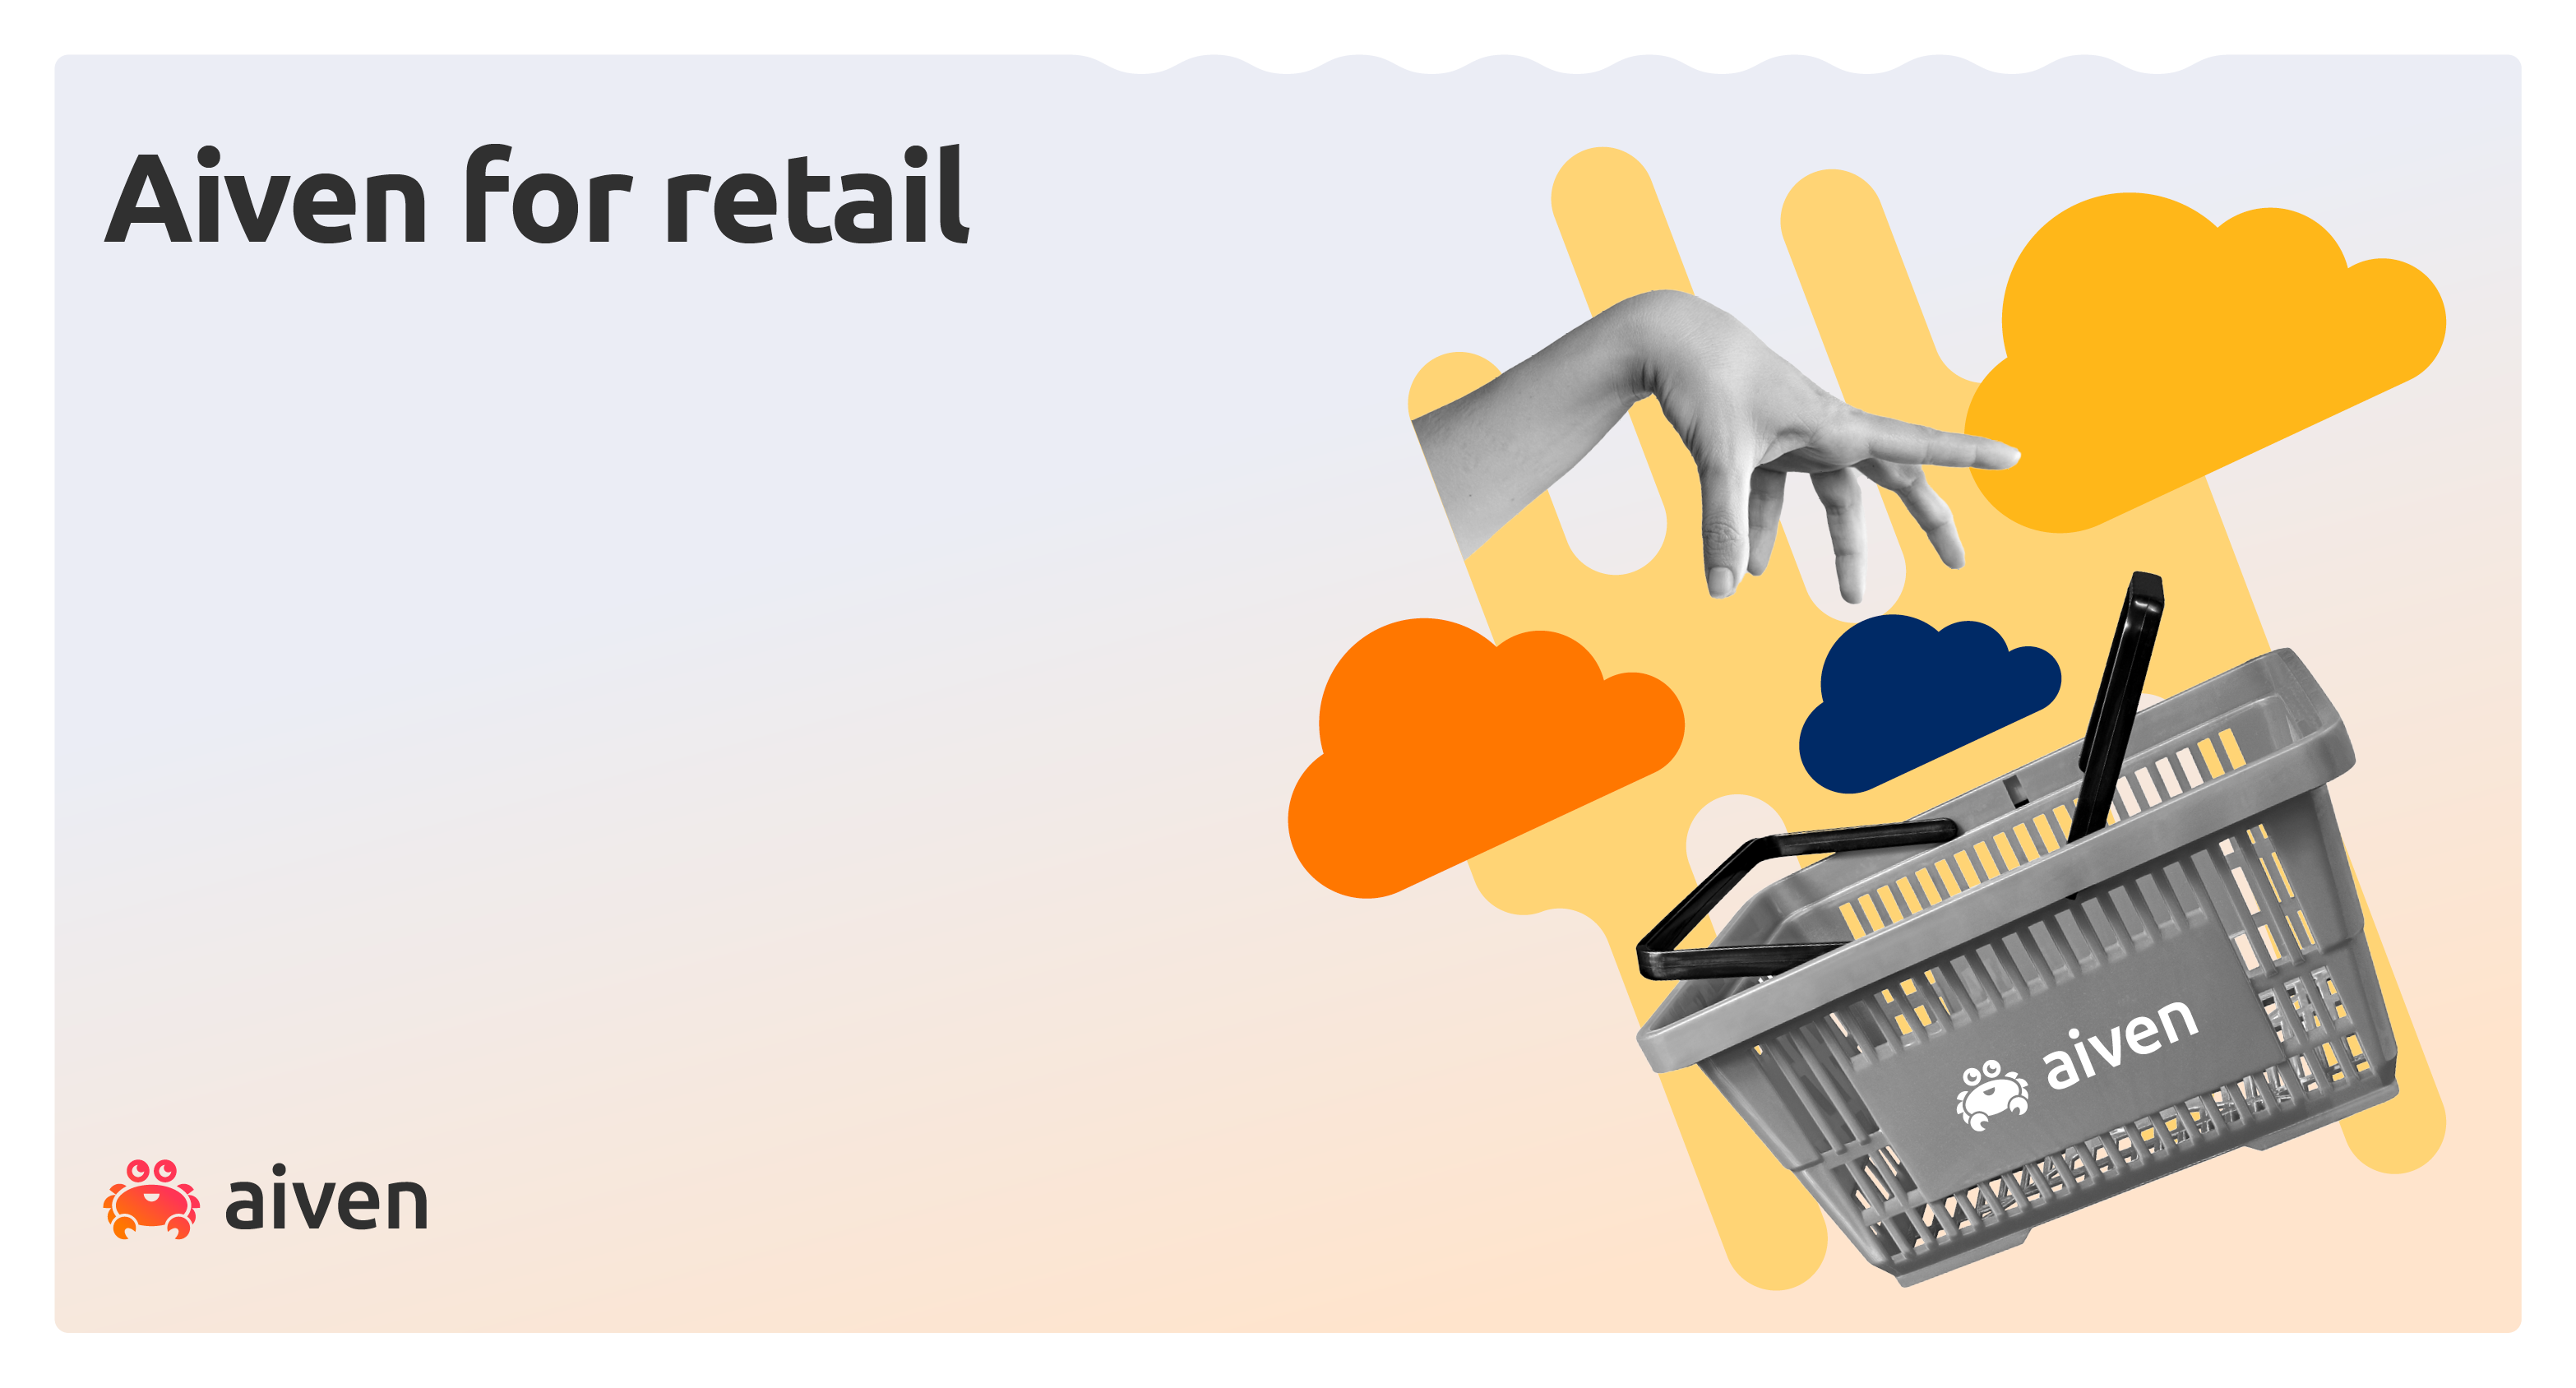 Managed cloud data works for retail illustration